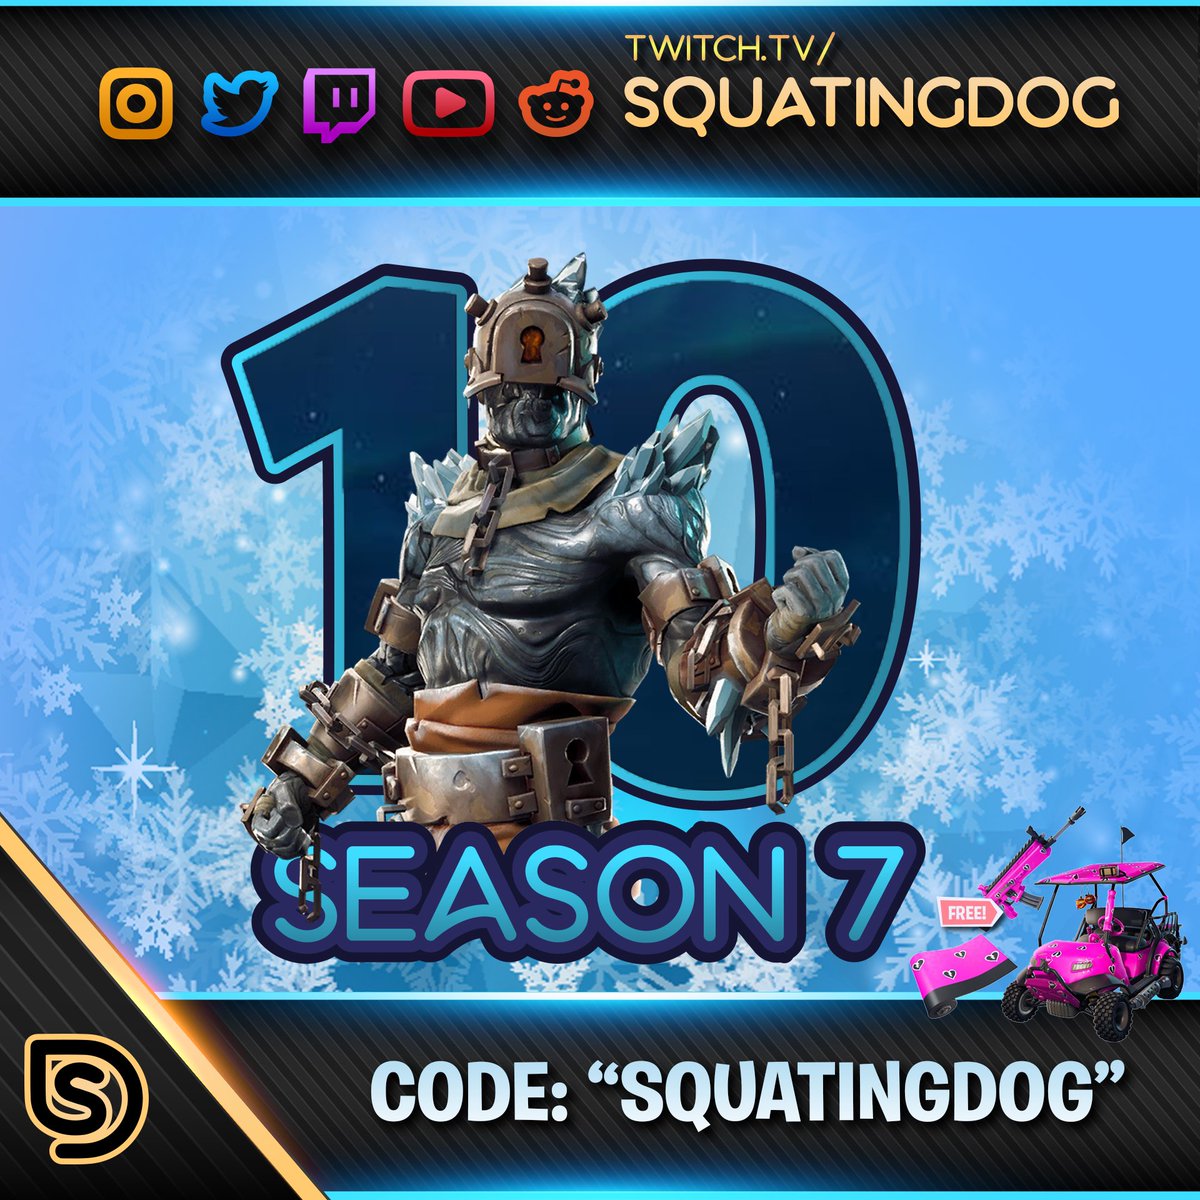 cheat sheet for fortnite battle royale s battlepass by thesquatingdog if you like this content use squatingdog as your support a creator - fortnite battle pass cheat sheet season 7